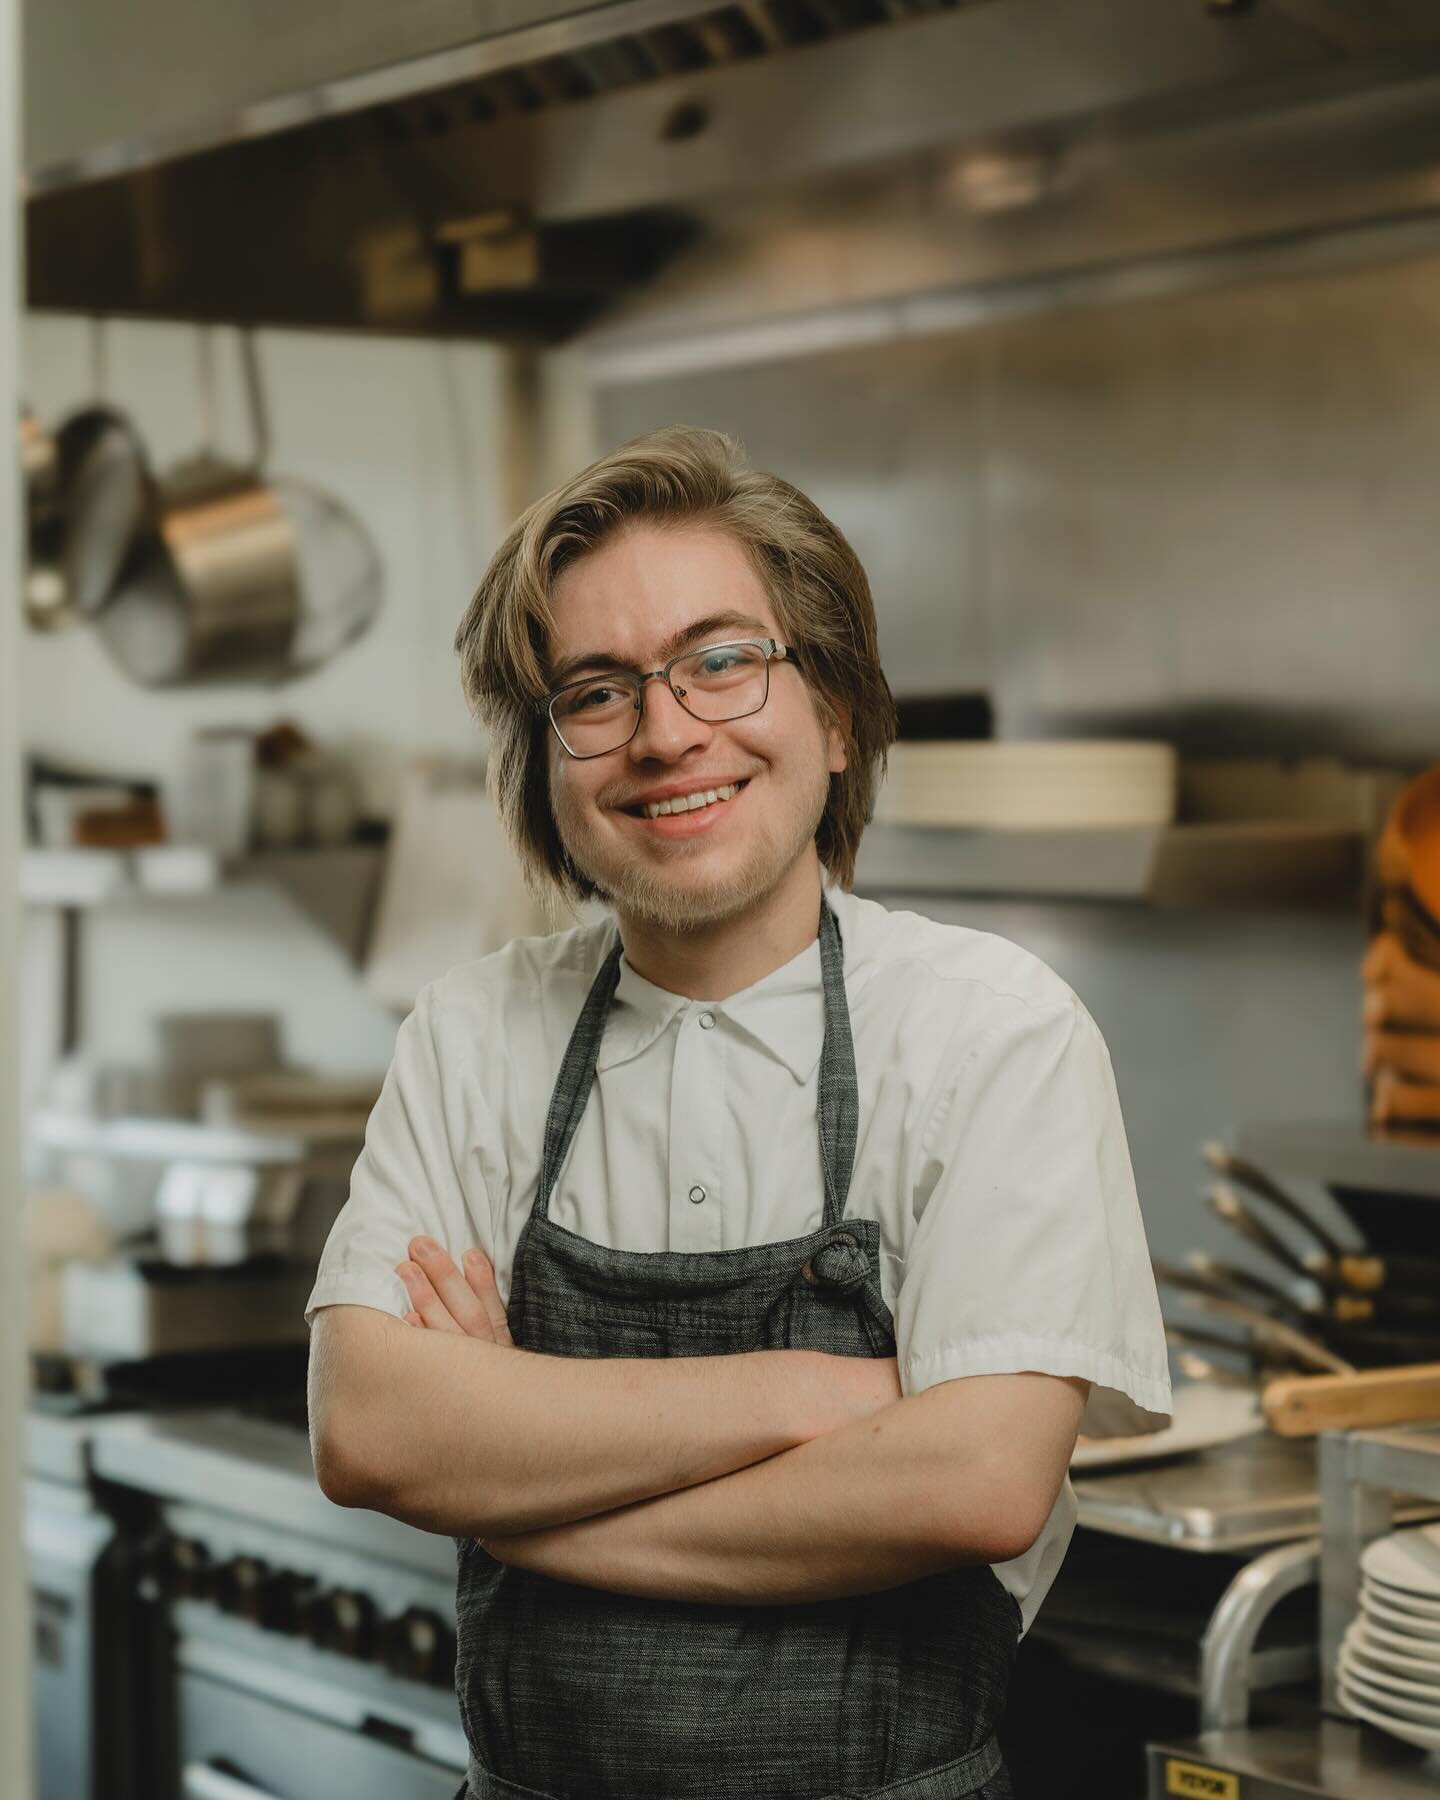 Chef Jackson (aka JT, J-money, Jax, JTizzle, etc..)

Jackson comes in everyday with intention and integrity. Hes the man behind the Nachos, Fermentations and all things Pastry here at Bar Lynn. 

Most importantly, He has perfected our Basque Cheeseca